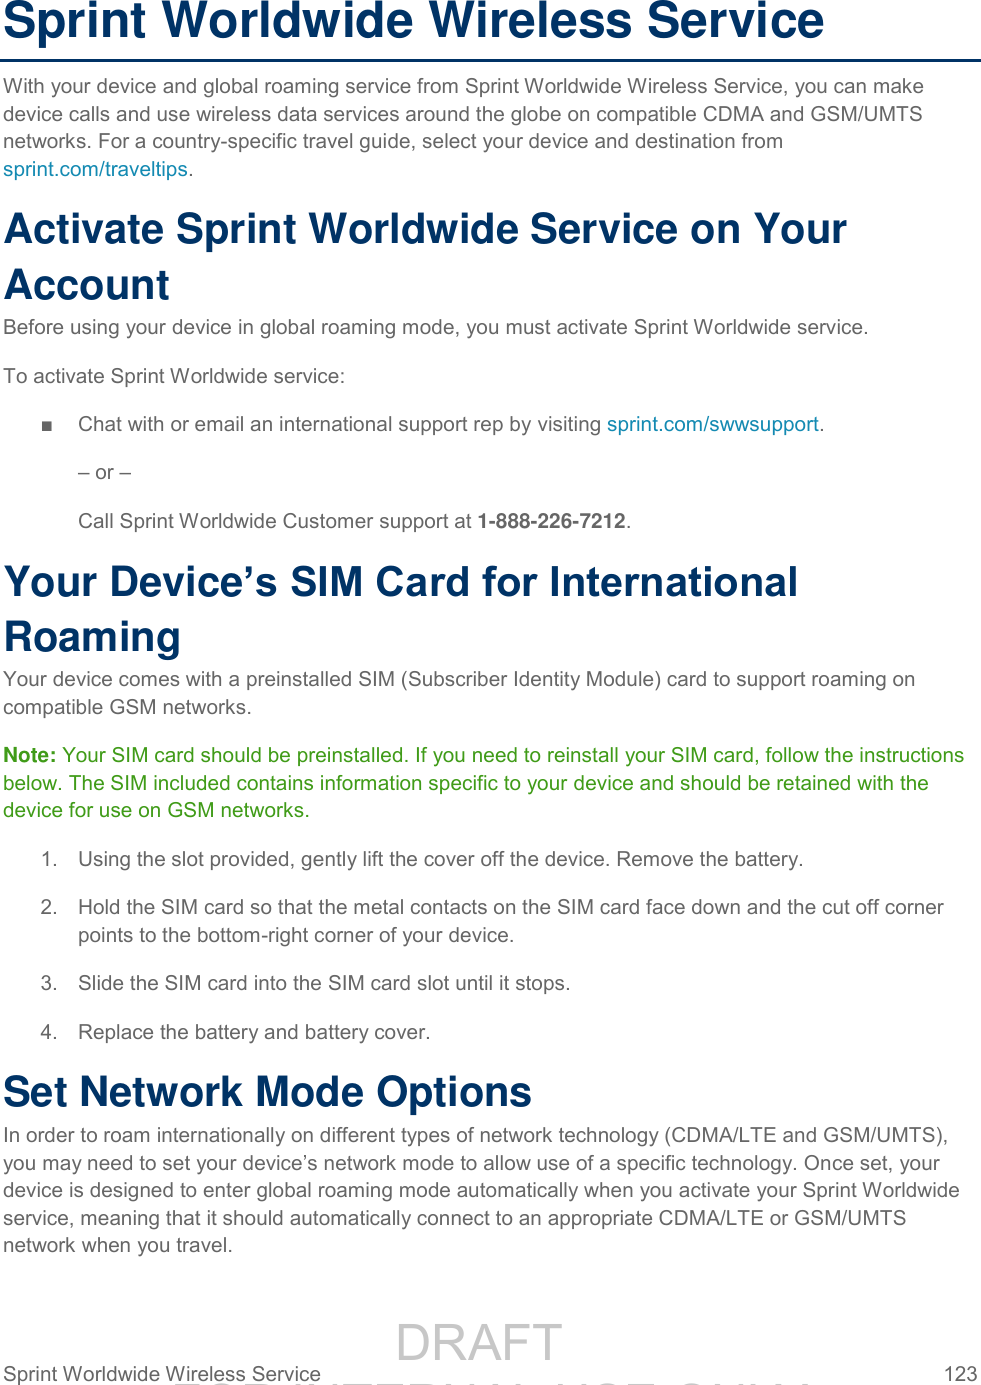                 DRAFT FOR INTERNAL USE ONLY Sprint Worldwide Wireless Service  123   Sprint Worldwide Wireless Service With your device and global roaming service from Sprint Worldwide Wireless Service, you can make device calls and use wireless data services around the globe on compatible CDMA and GSM/UMTS networks. For a country-specific travel guide, select your device and destination from sprint.com/traveltips. Activate Sprint Worldwide Service on Your Account  Before using your device in global roaming mode, you must activate Sprint Worldwide service.  To activate Sprint Worldwide service: ■  Chat with or email an international support rep by visiting sprint.com/swwsupport. – or – Call Sprint Worldwide Customer support at 1-888-226-7212.  Your Device’s SIM Card for International Roaming Your device comes with a preinstalled SIM (Subscriber Identity Module) card to support roaming on compatible GSM networks. Note: Your SIM card should be preinstalled. If you need to reinstall your SIM card, follow the instructions below. The SIM included contains information specific to your device and should be retained with the device for use on GSM networks. 1.  Using the slot provided, gently lift the cover off the device. Remove the battery. 2.  Hold the SIM card so that the metal contacts on the SIM card face down and the cut off corner points to the bottom-right corner of your device. 3.  Slide the SIM card into the SIM card slot until it stops. 4.  Replace the battery and battery cover.  Set Network Mode Options In order to roam internationally on different types of network technology (CDMA/LTE and GSM/UMTS), you may need to set your device’s network mode to allow use of a specific technology. Once set, your device is designed to enter global roaming mode automatically when you activate your Sprint Worldwide service, meaning that it should automatically connect to an appropriate CDMA/LTE or GSM/UMTS network when you travel. 